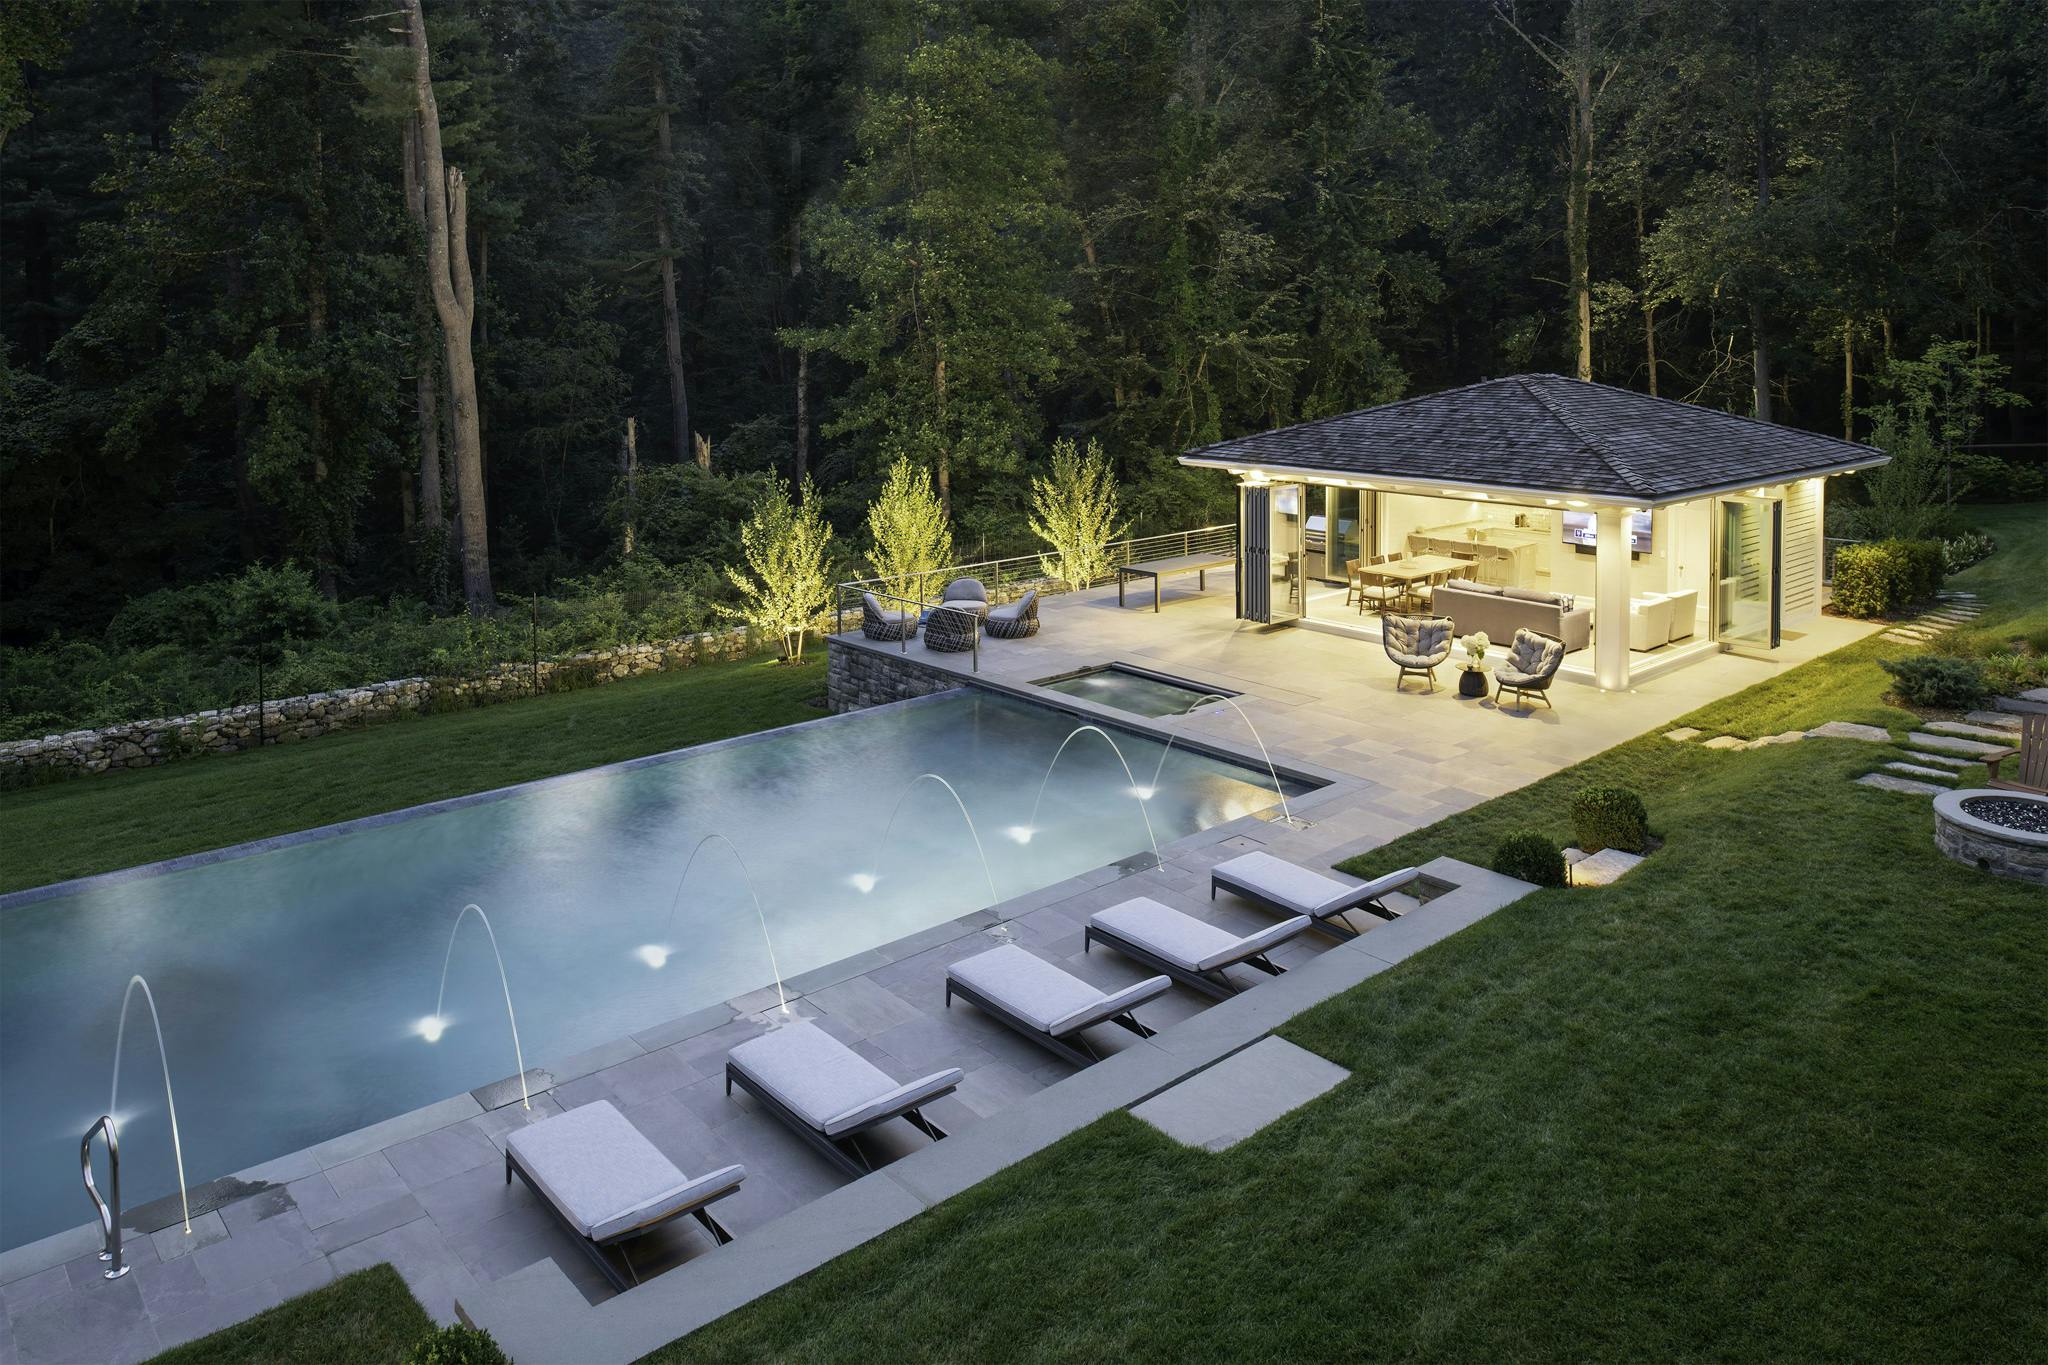 pool house glows with open folding glass walls by NanaWall